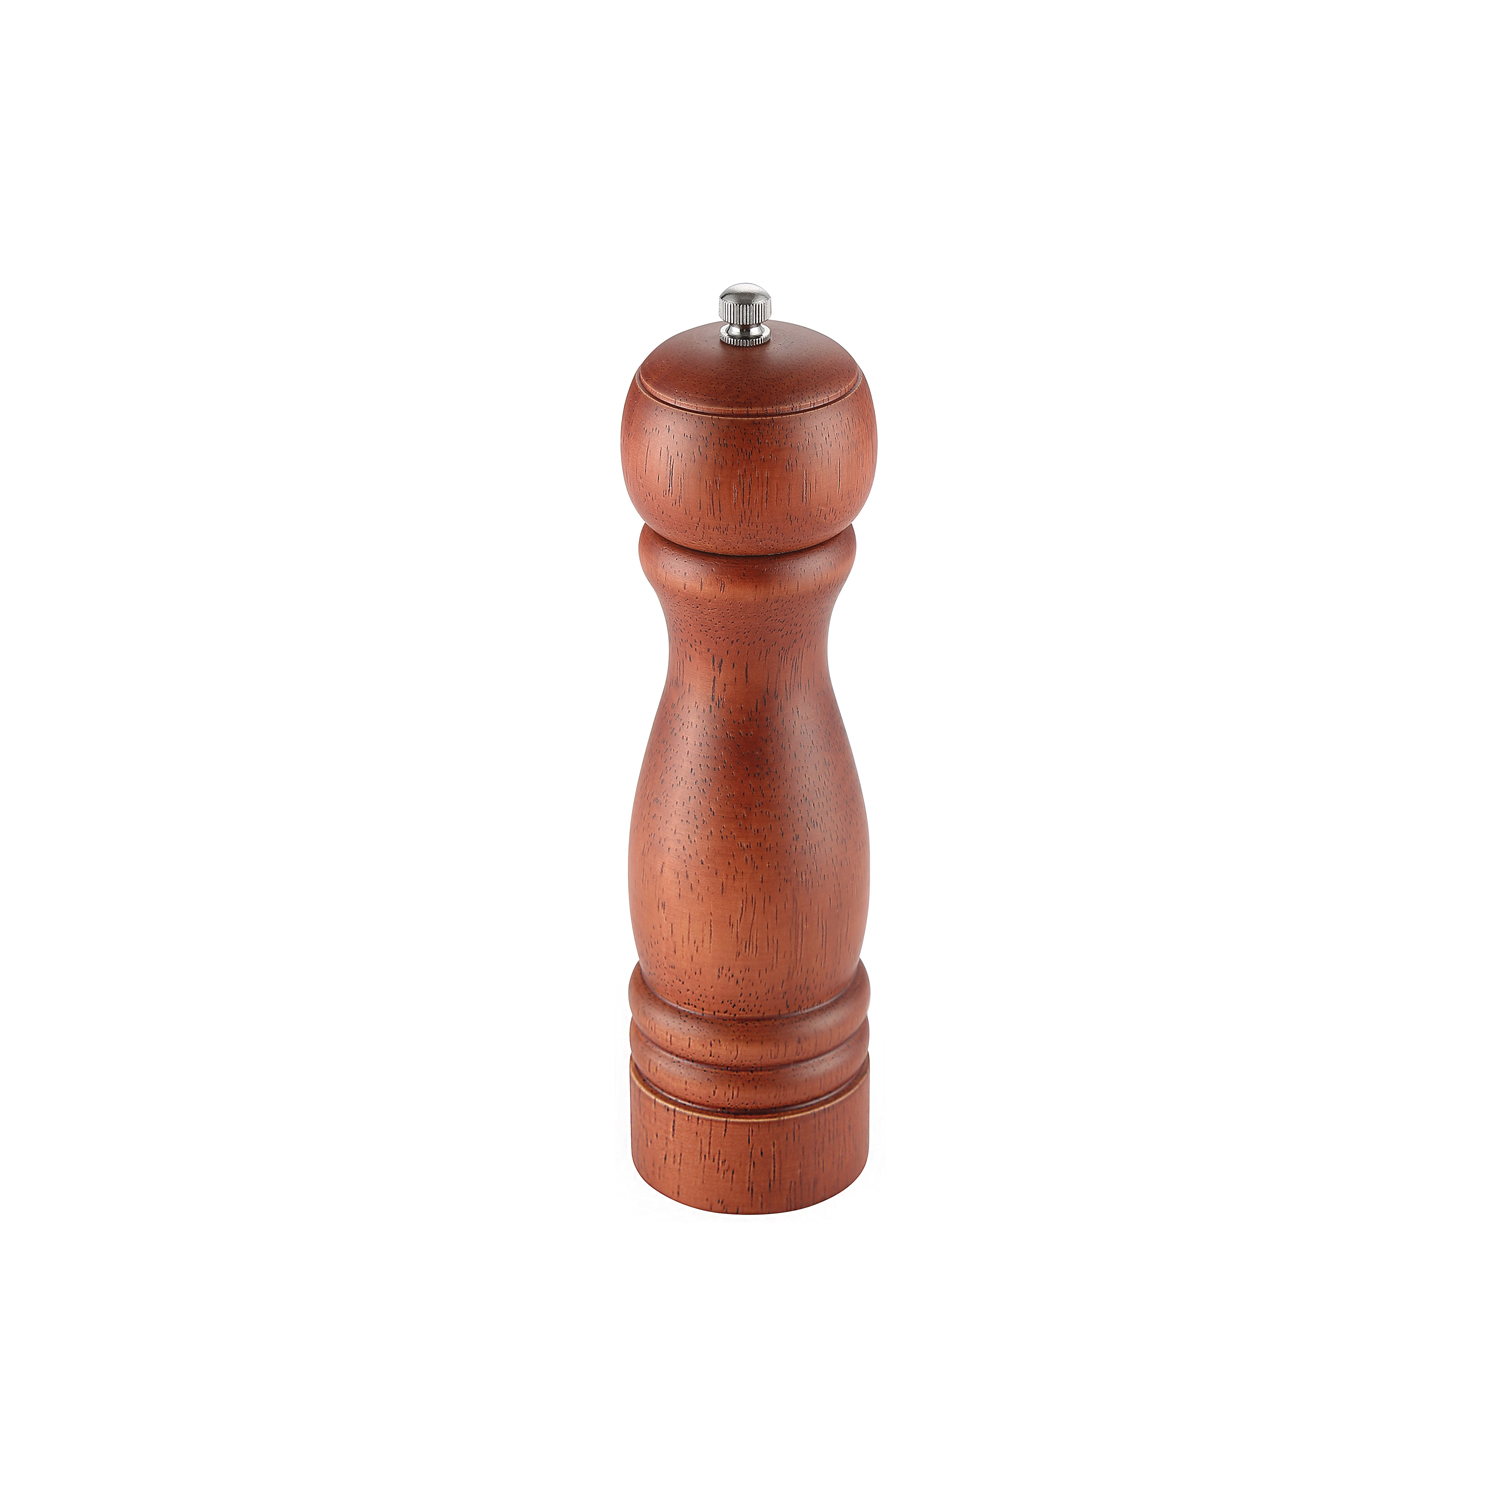 CAC China PMW1-8BN Pepper Mill Wooden Brown 8"H